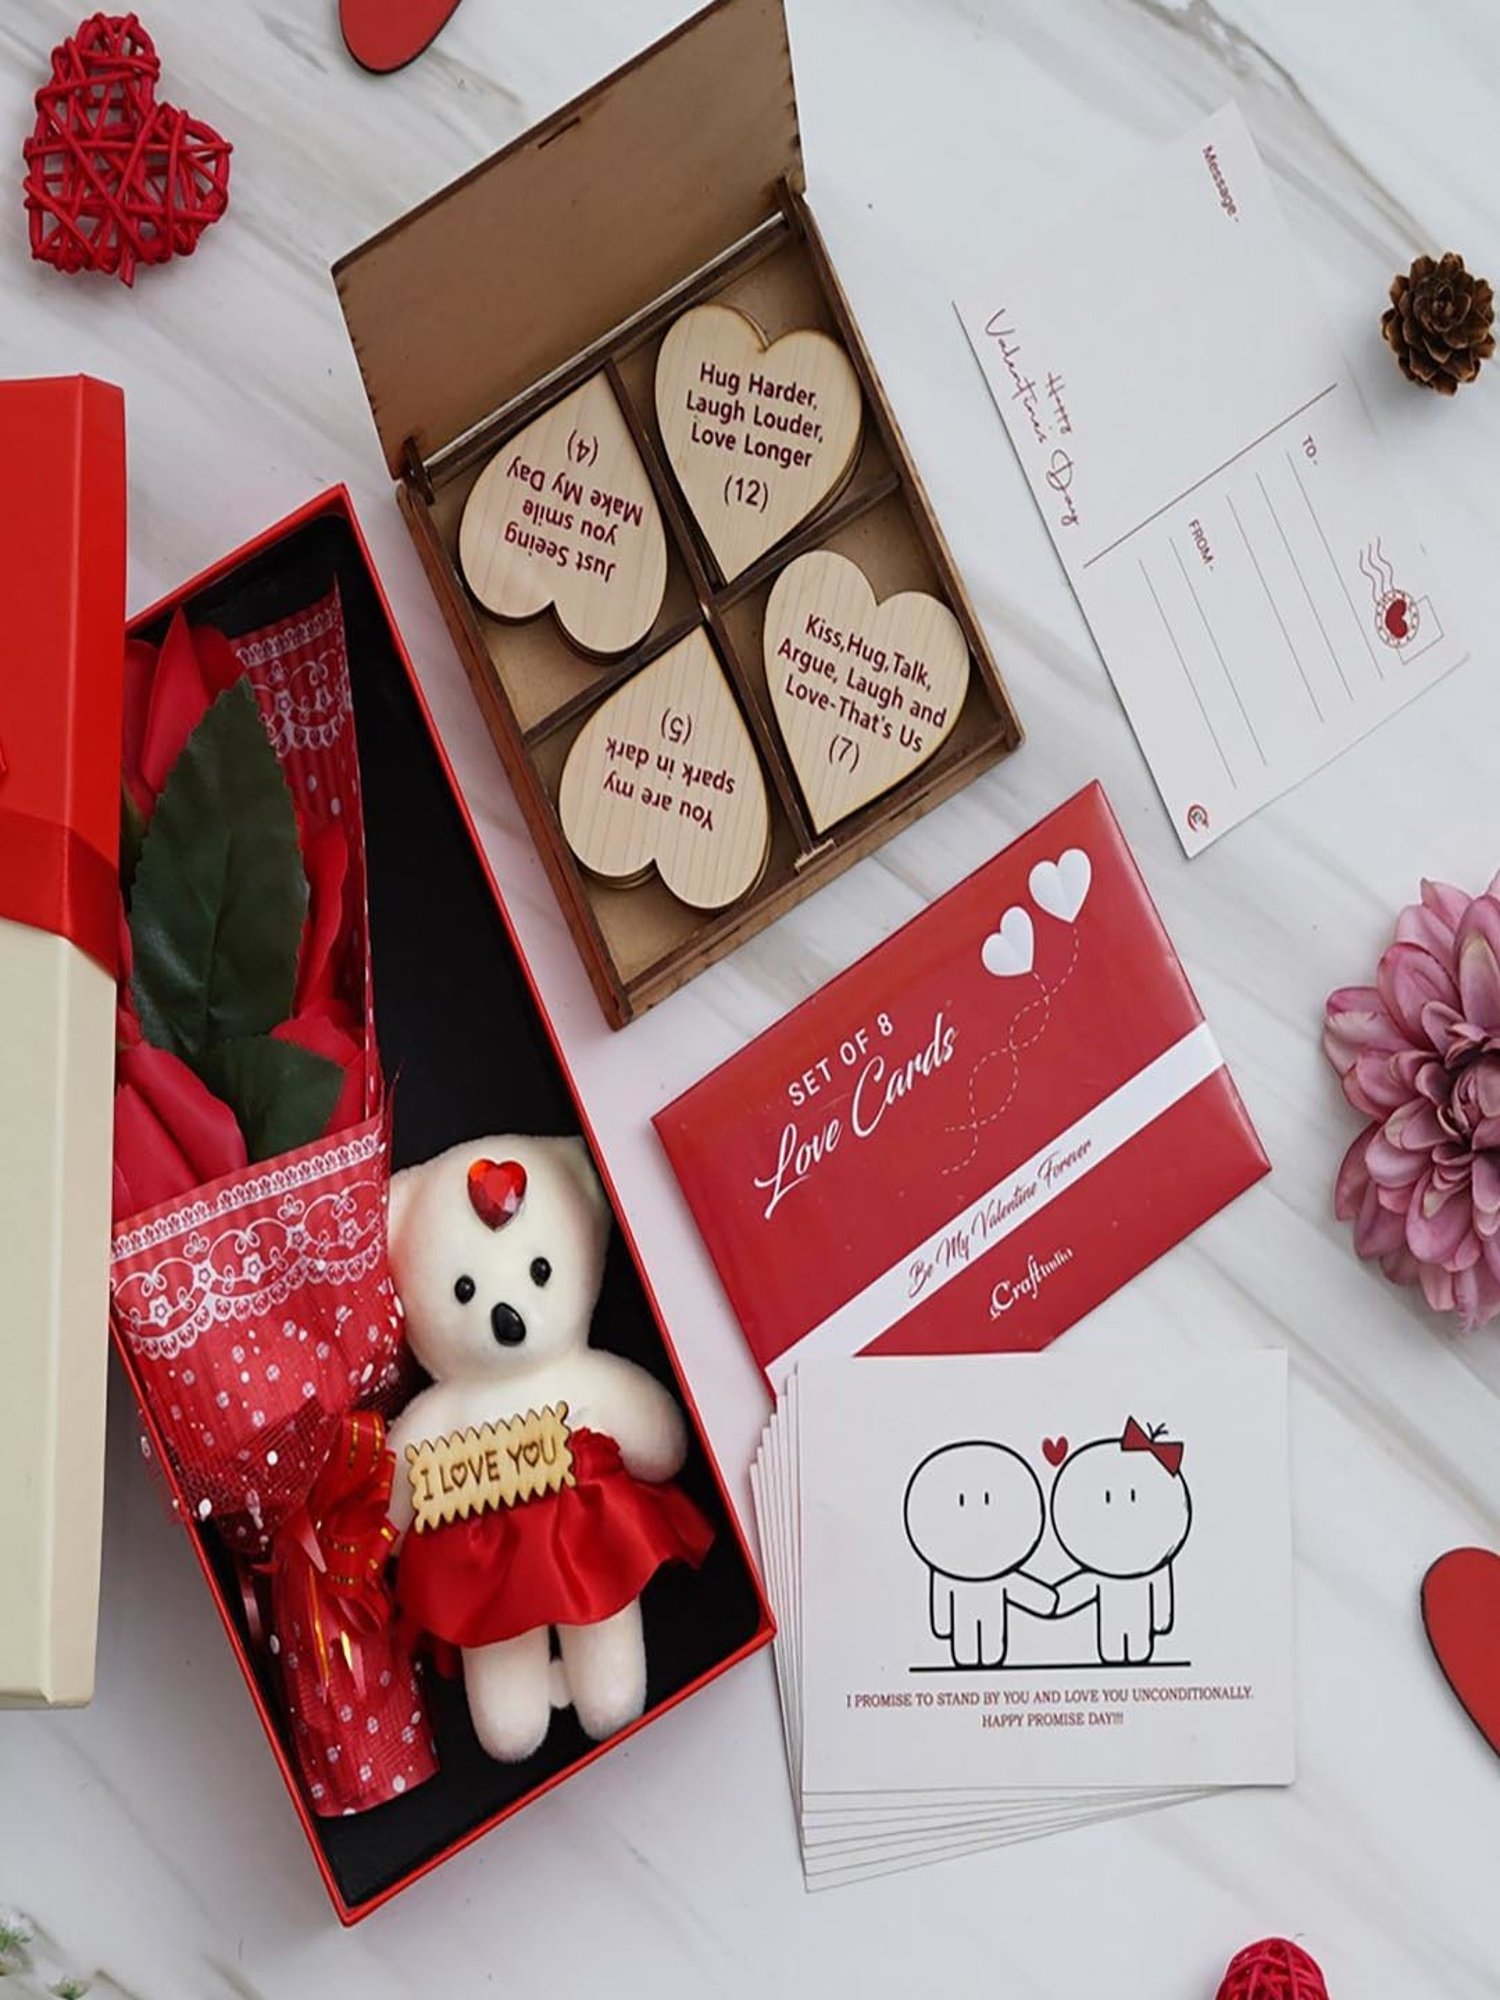 Happy Valentine's Day: Thoughtful gift ideas to impress your partner on  February 14 | Mint